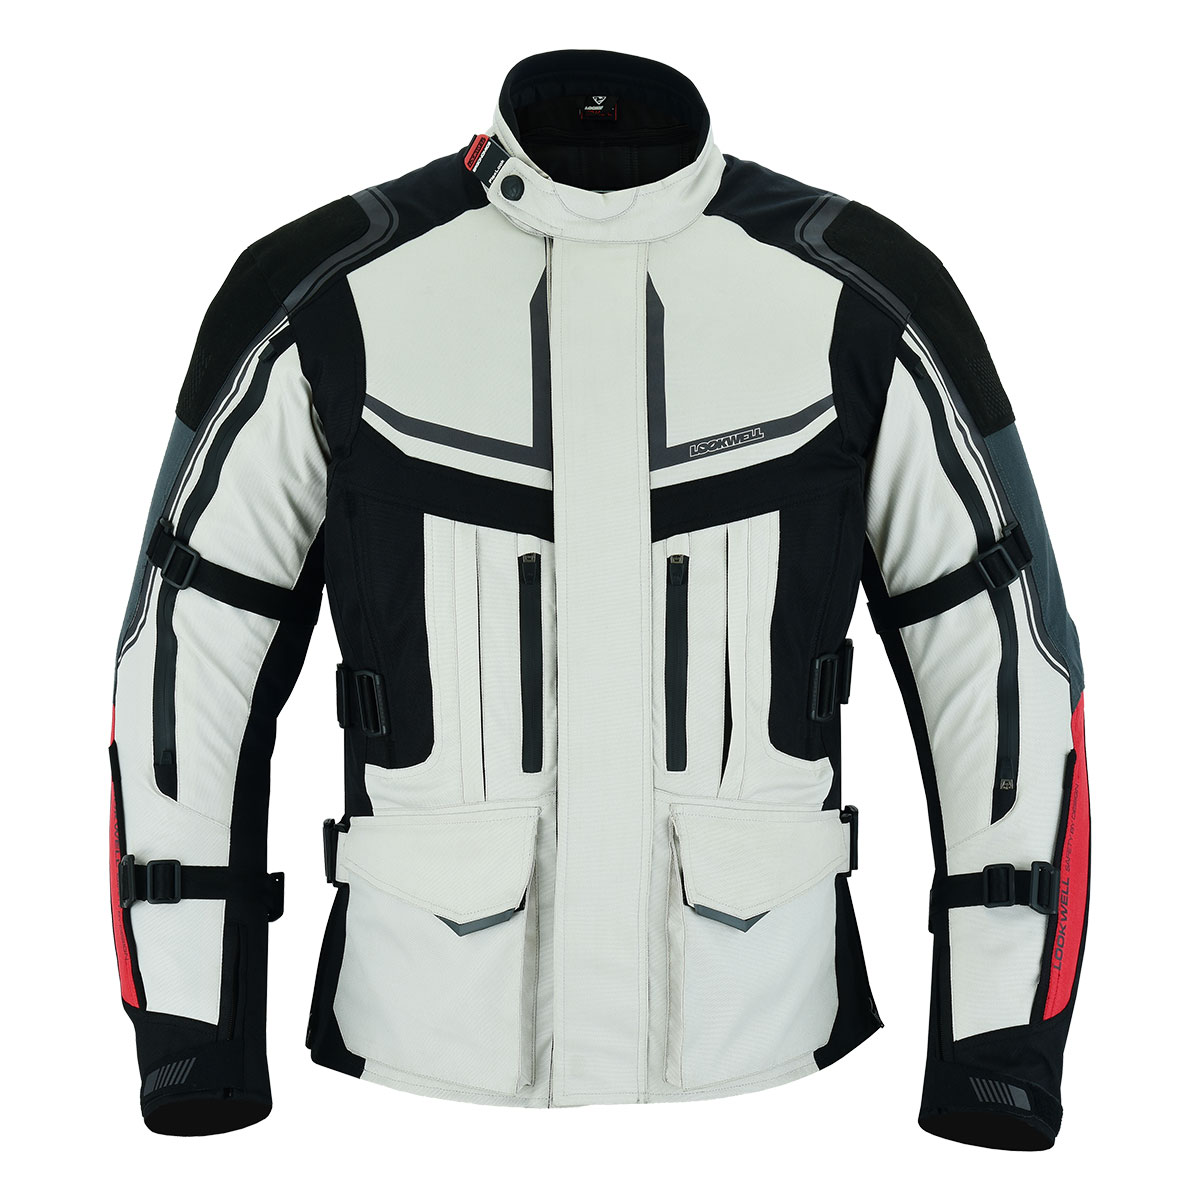 Storm - Lookwell Motorcycle Apparel